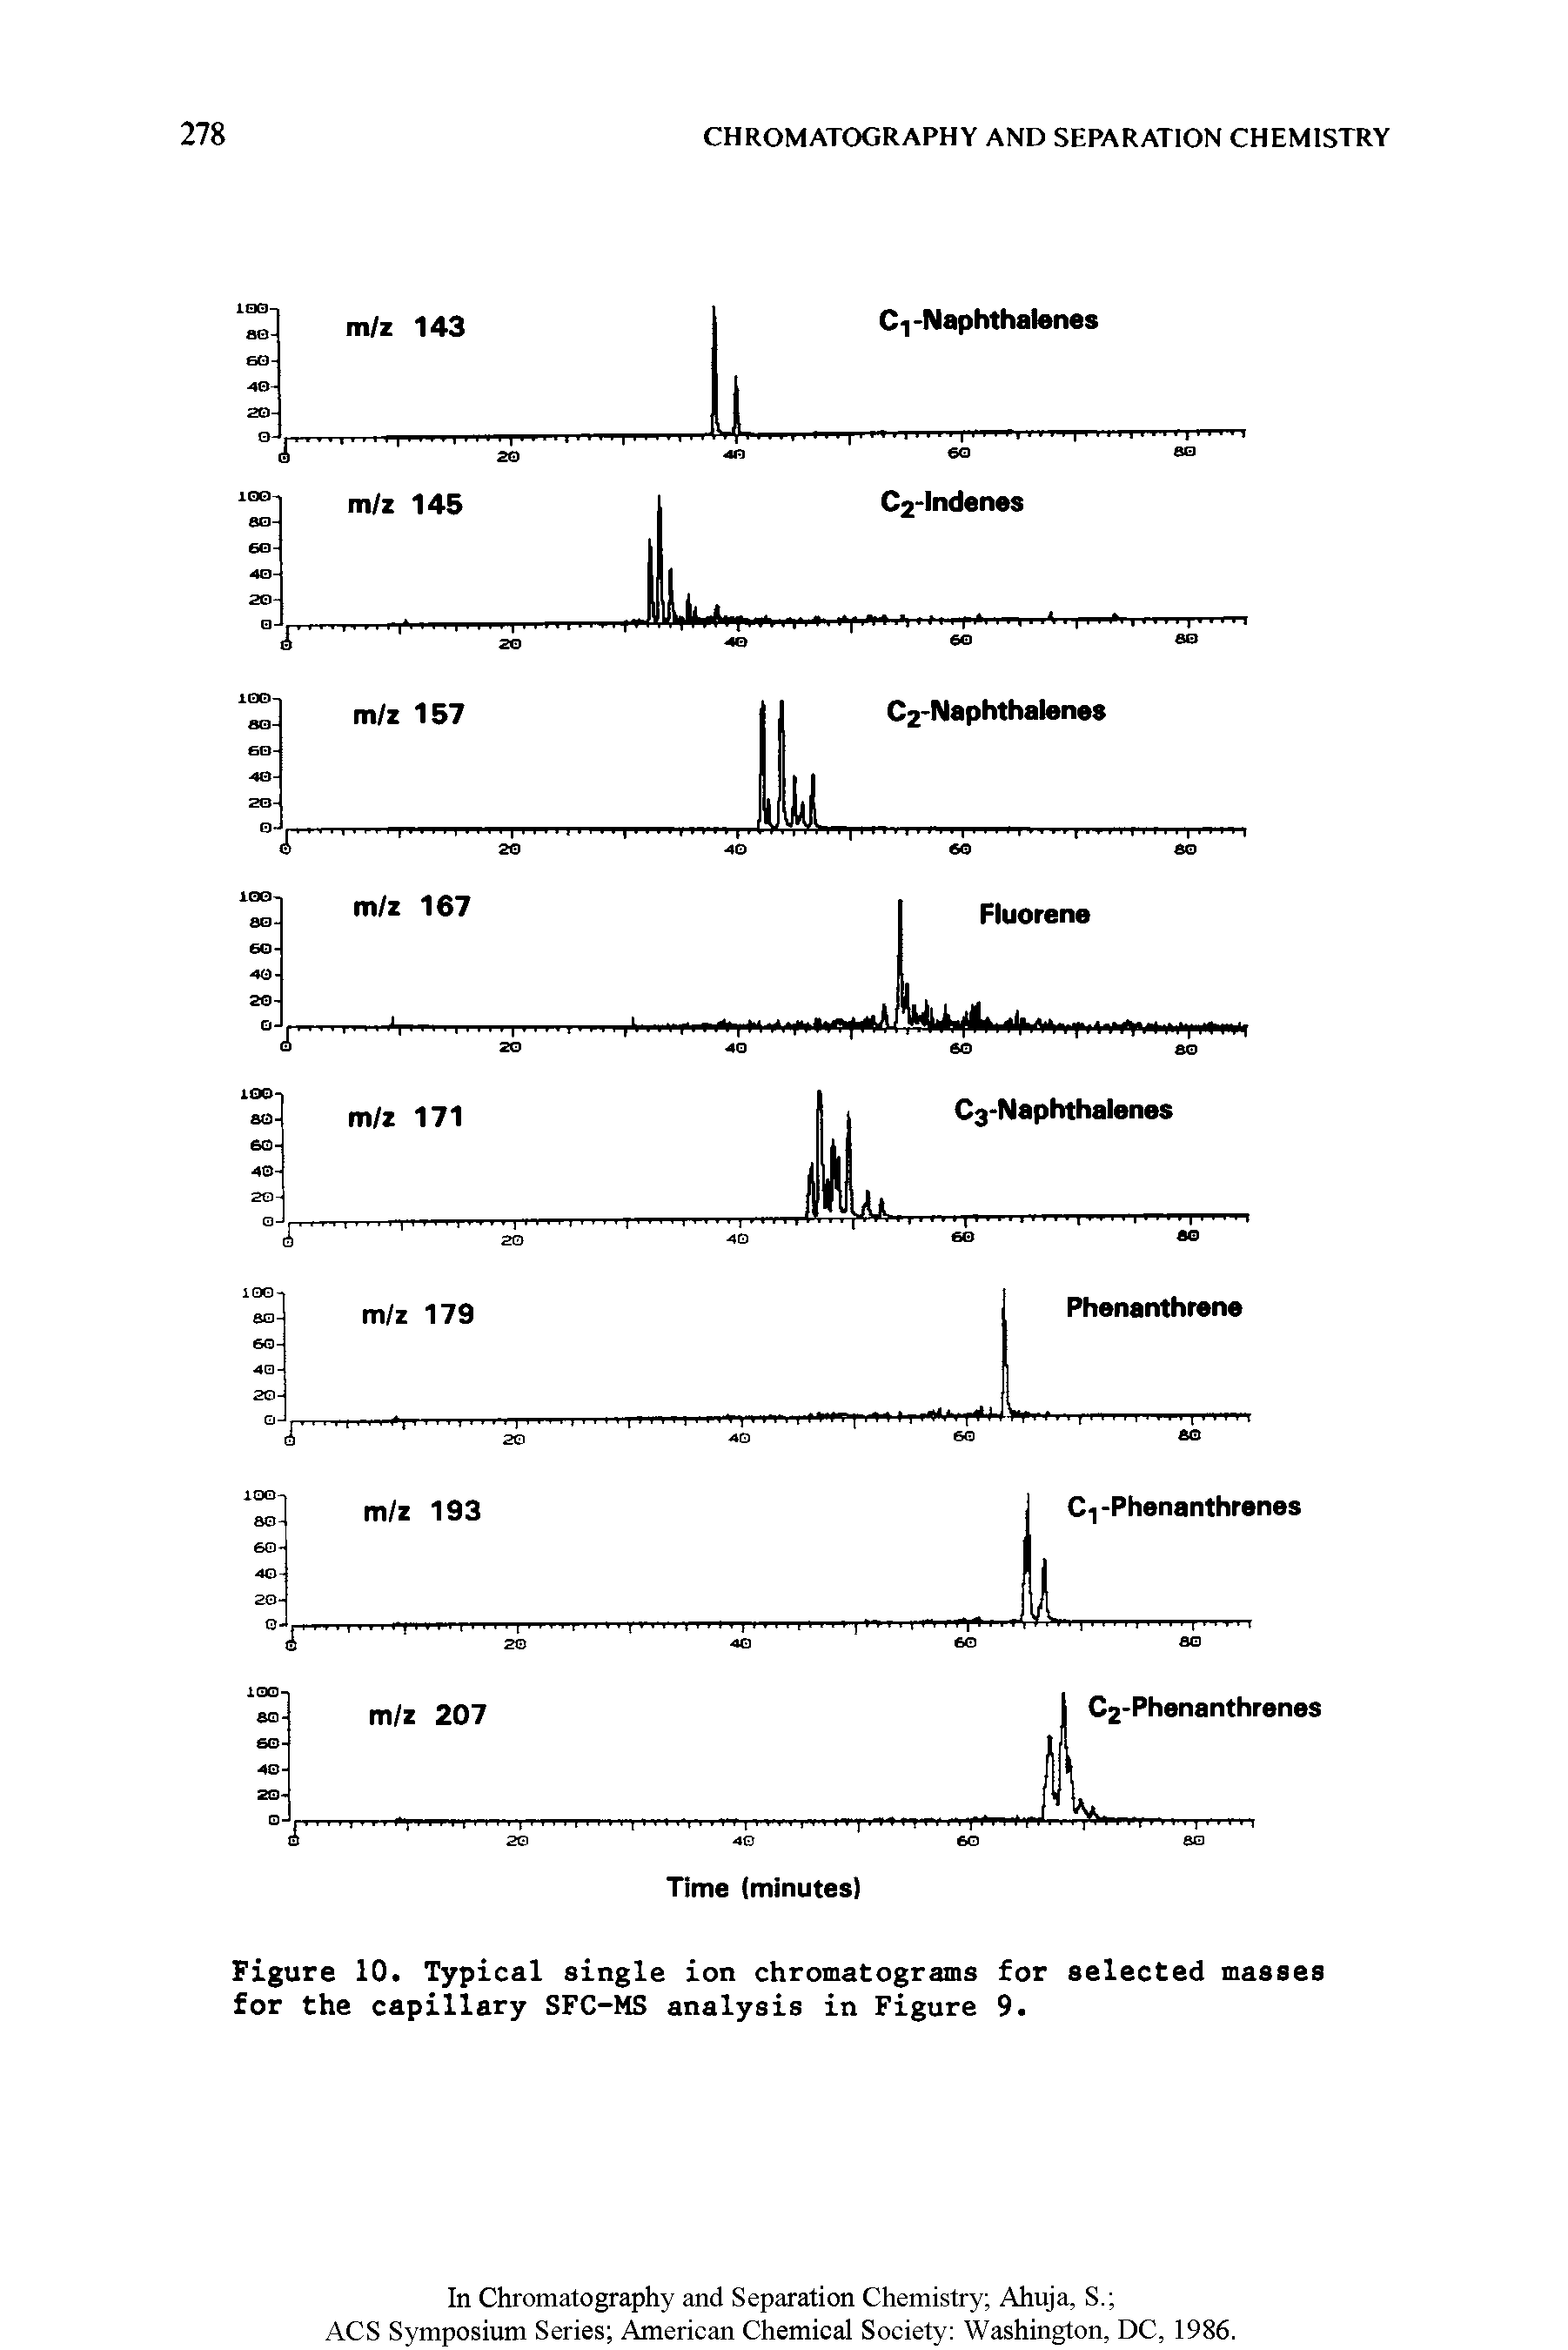 Figure 10. Typical single ion chromatograms for selected masses for the capillary SFC-MS analysis in Figure 9.